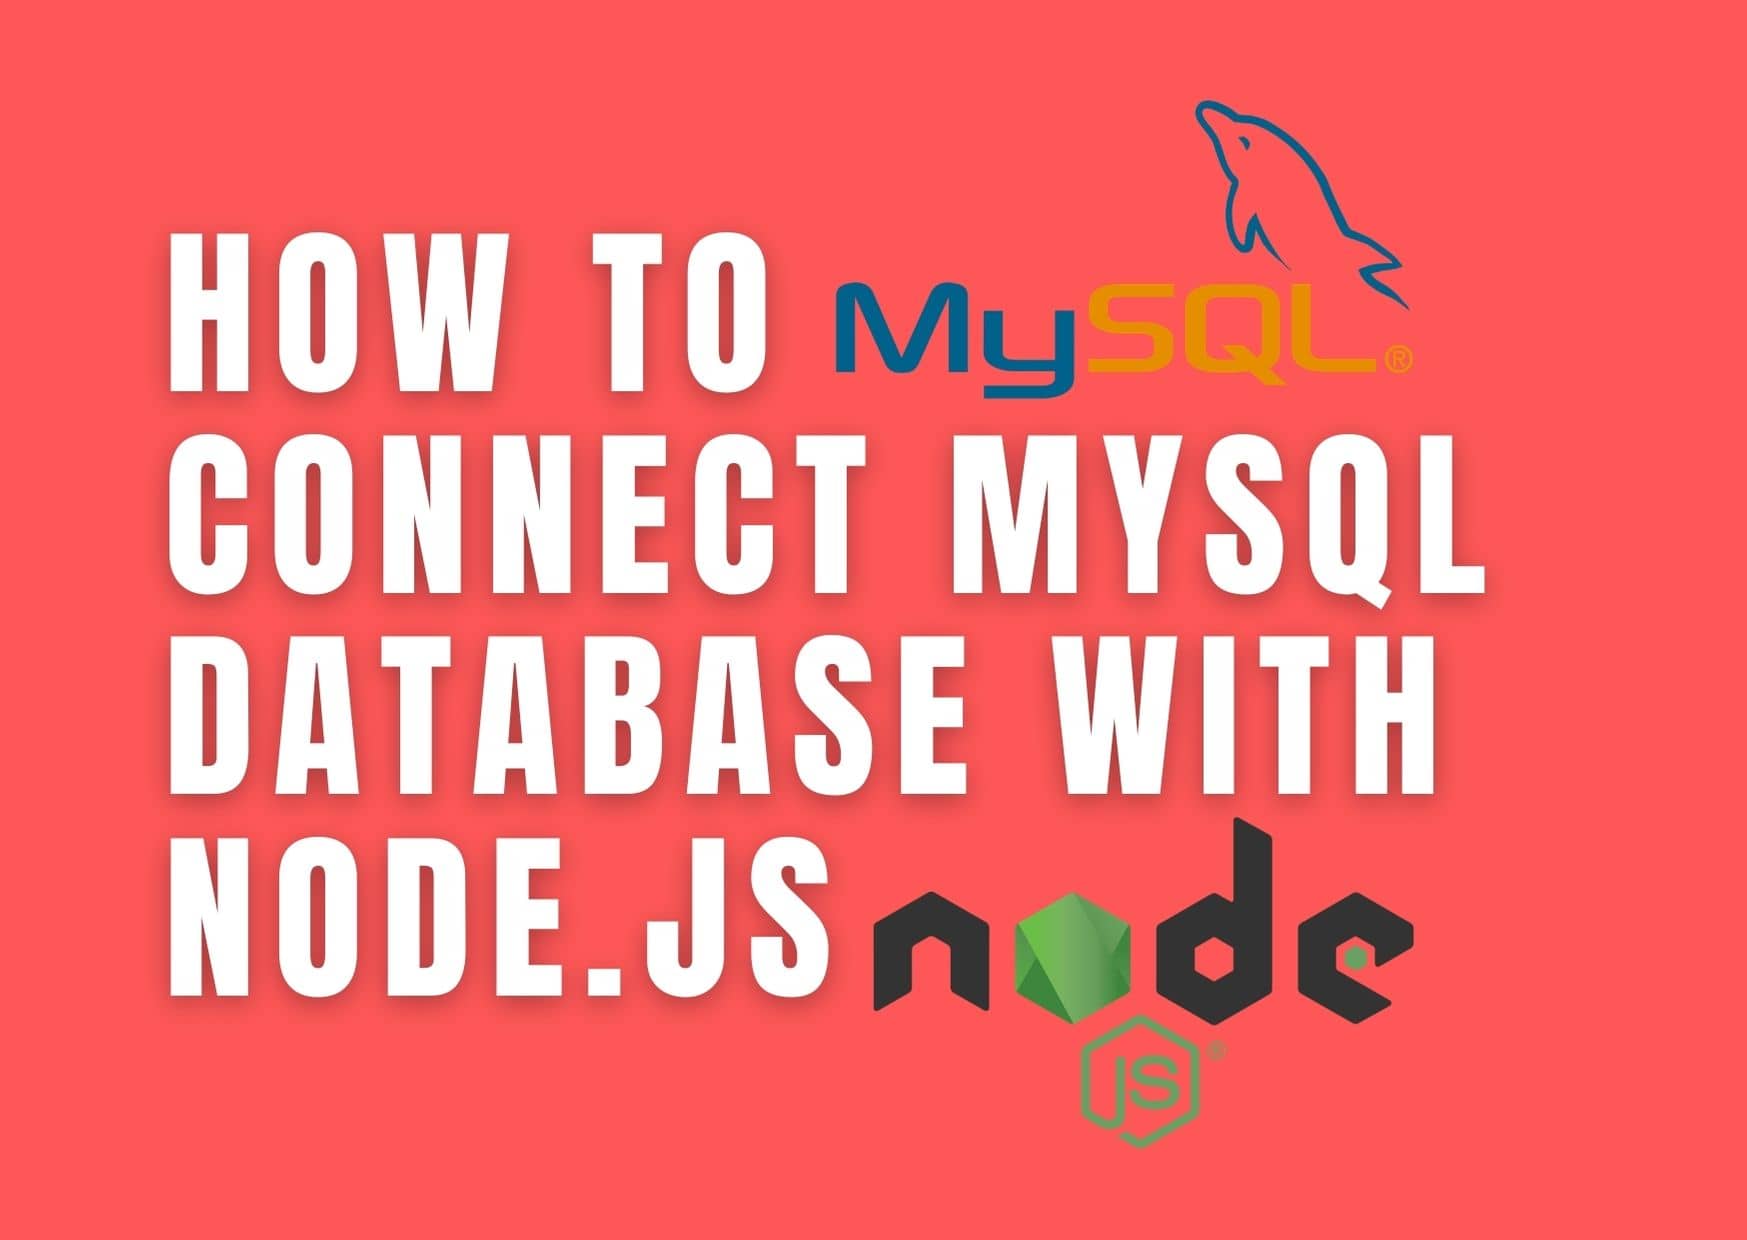 How to connect MySQL database with Express js (Node.js)